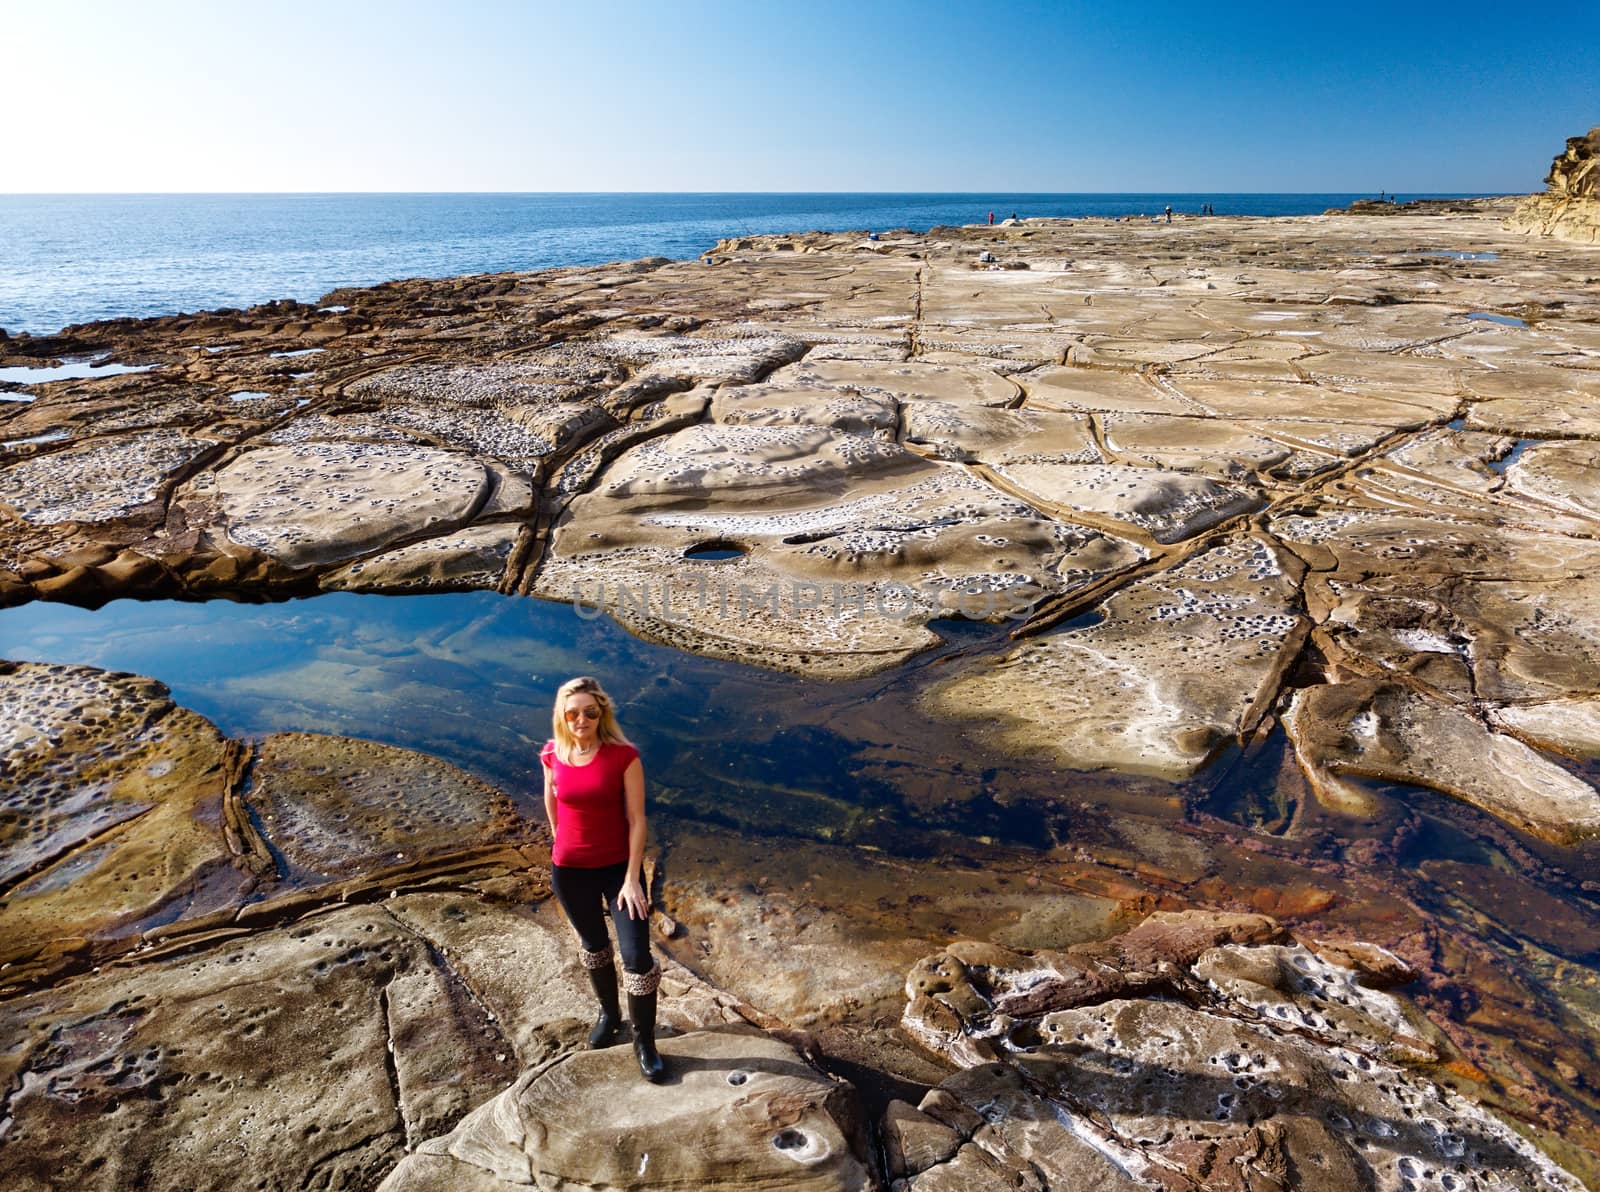 Standing in an eroded coastal landscape by lovleah